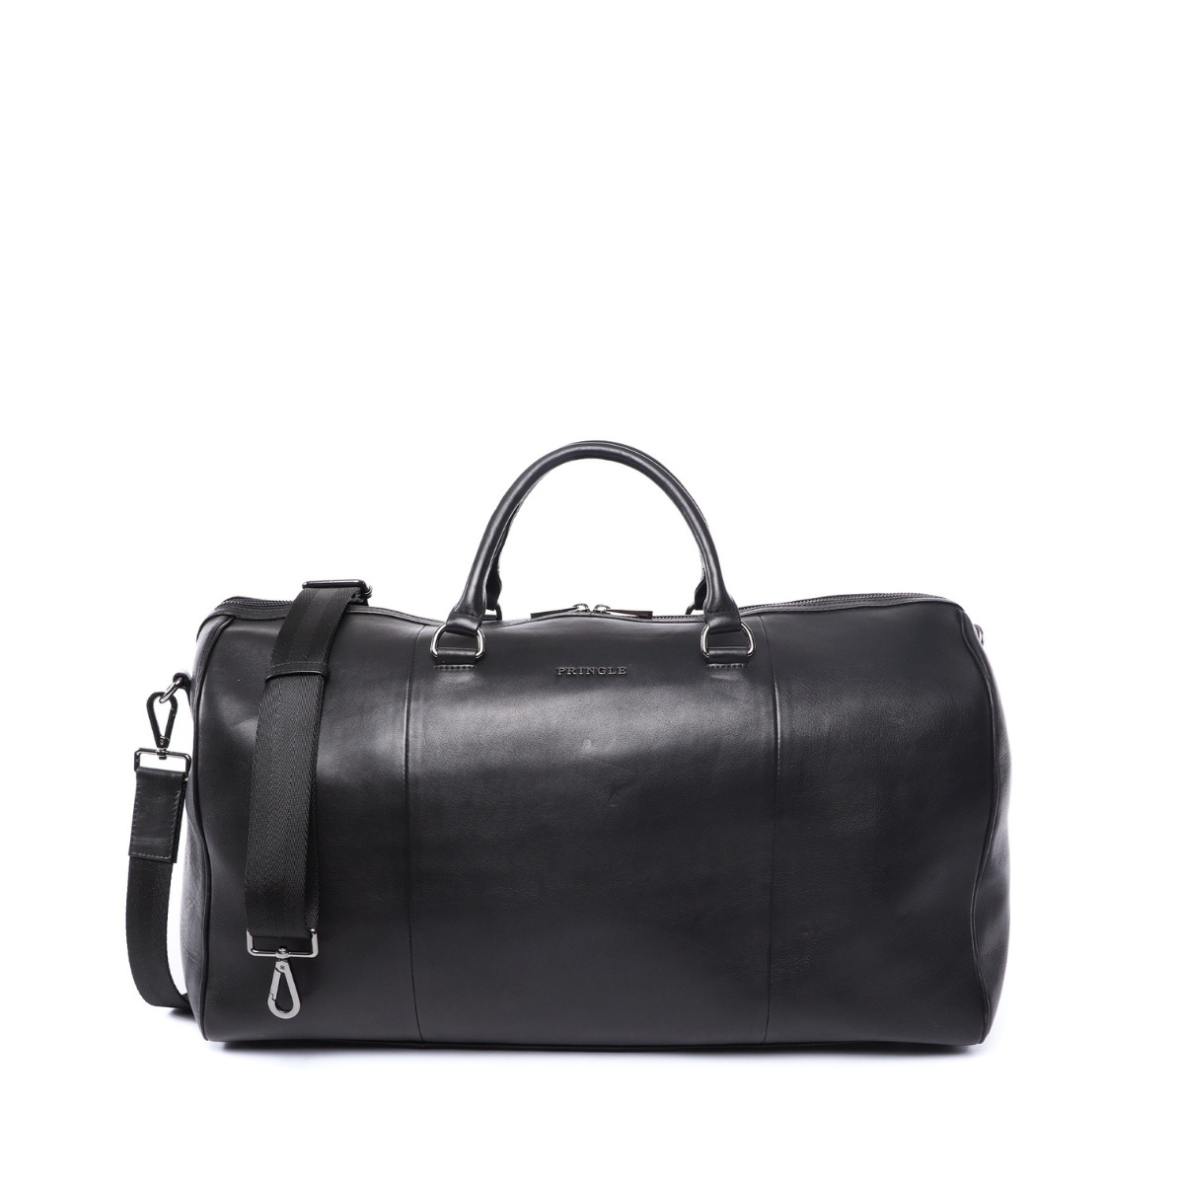 PRINGLE MATEO DUFFEL BAG MENS - Destinations by Frasers